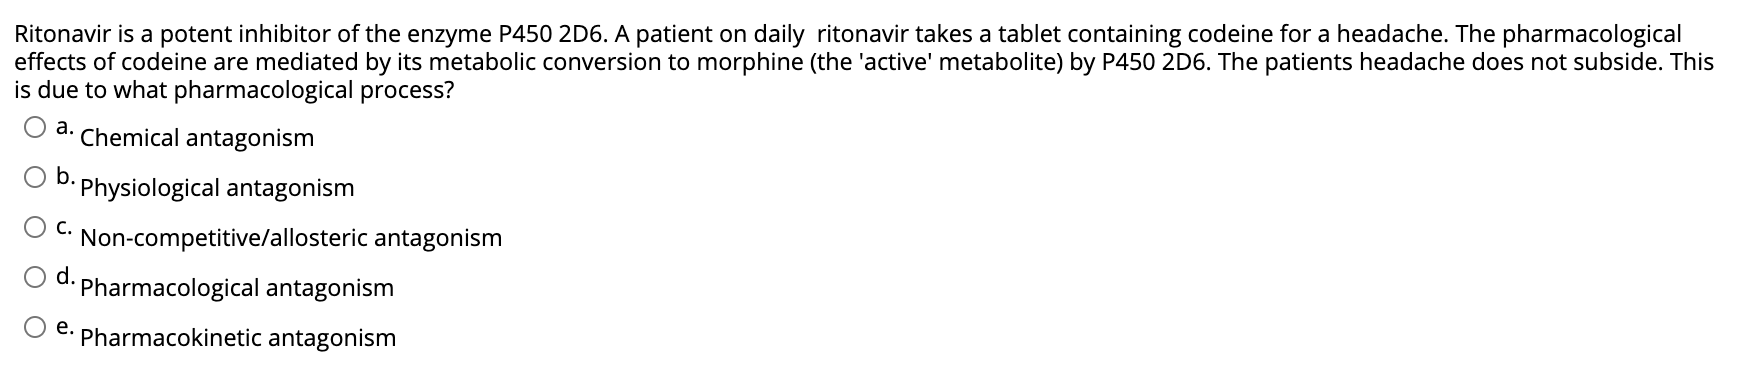 a. Ritonavir is a potent inhibitor of the enzyme P450 206. A patient on daily ritonavir takes a tablet containing codeine for